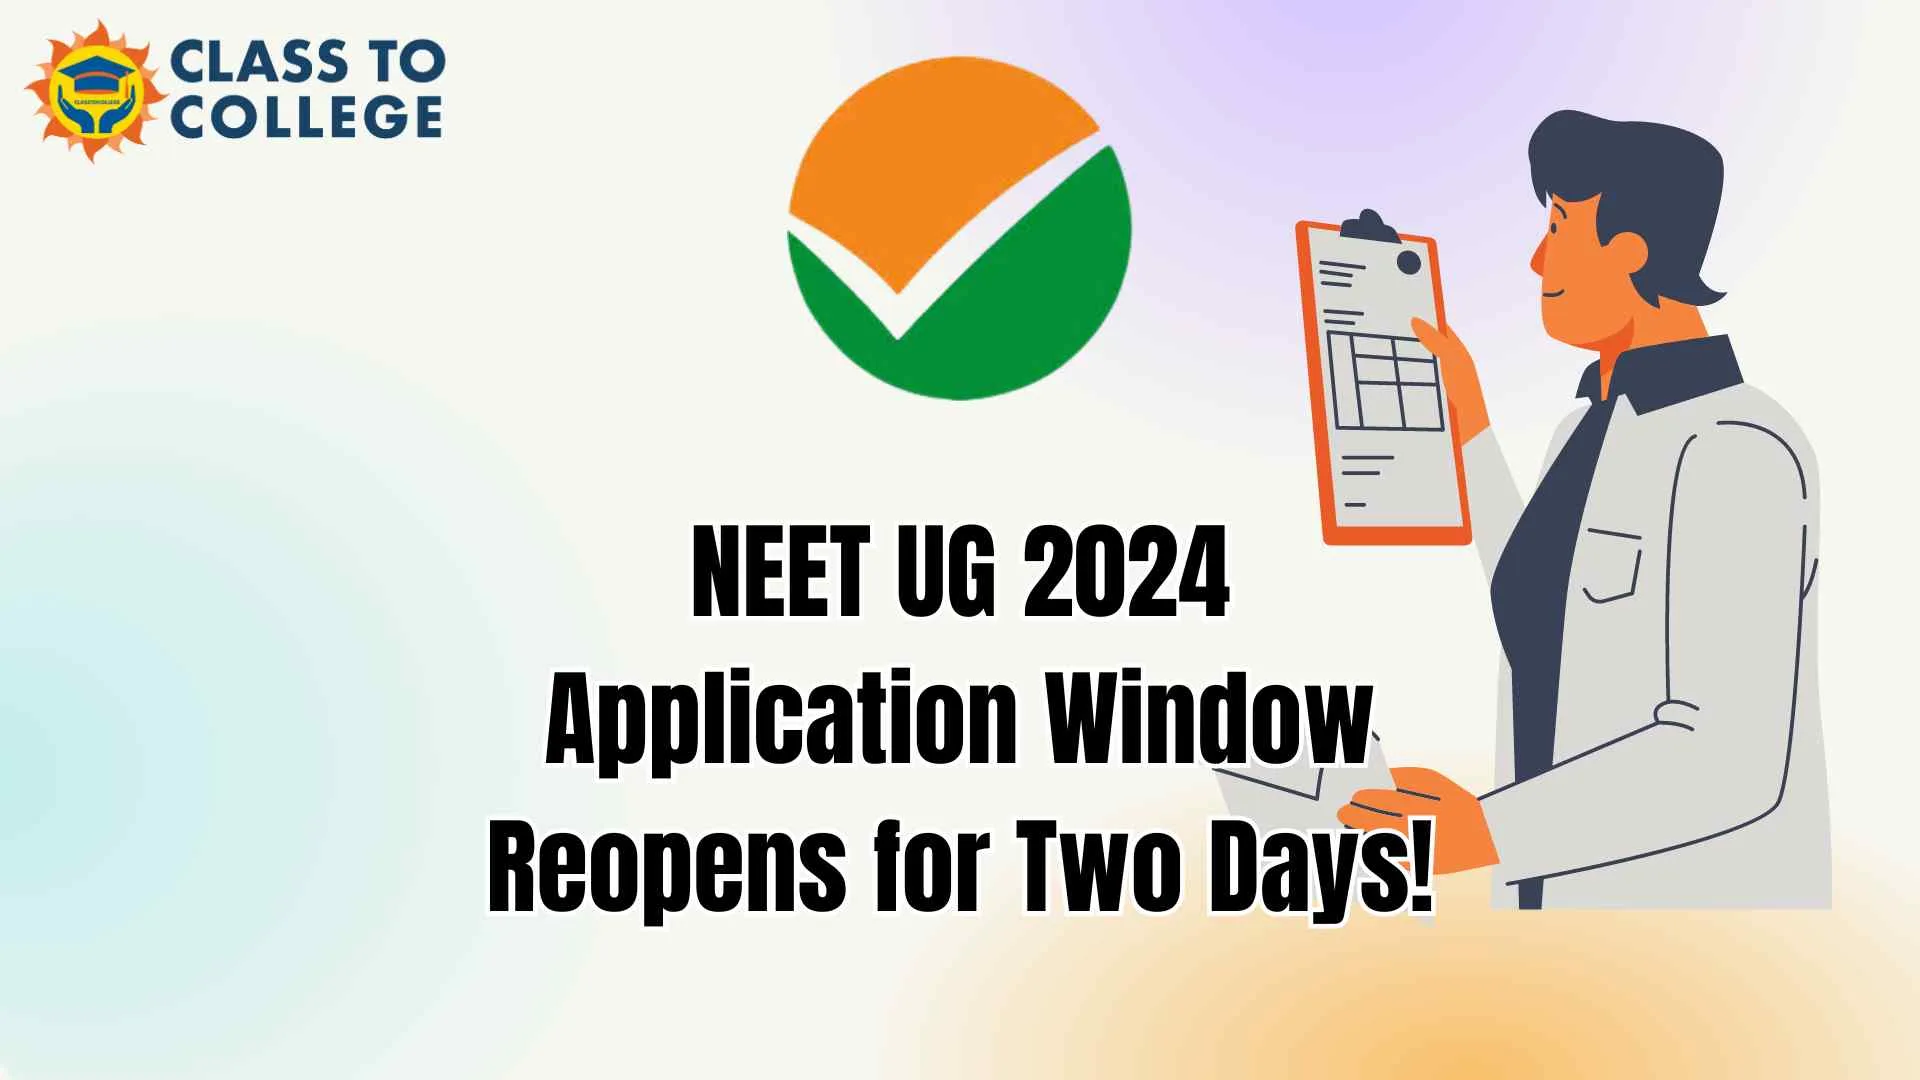 NEET UG 2024 Application Window Reopens for Two Days